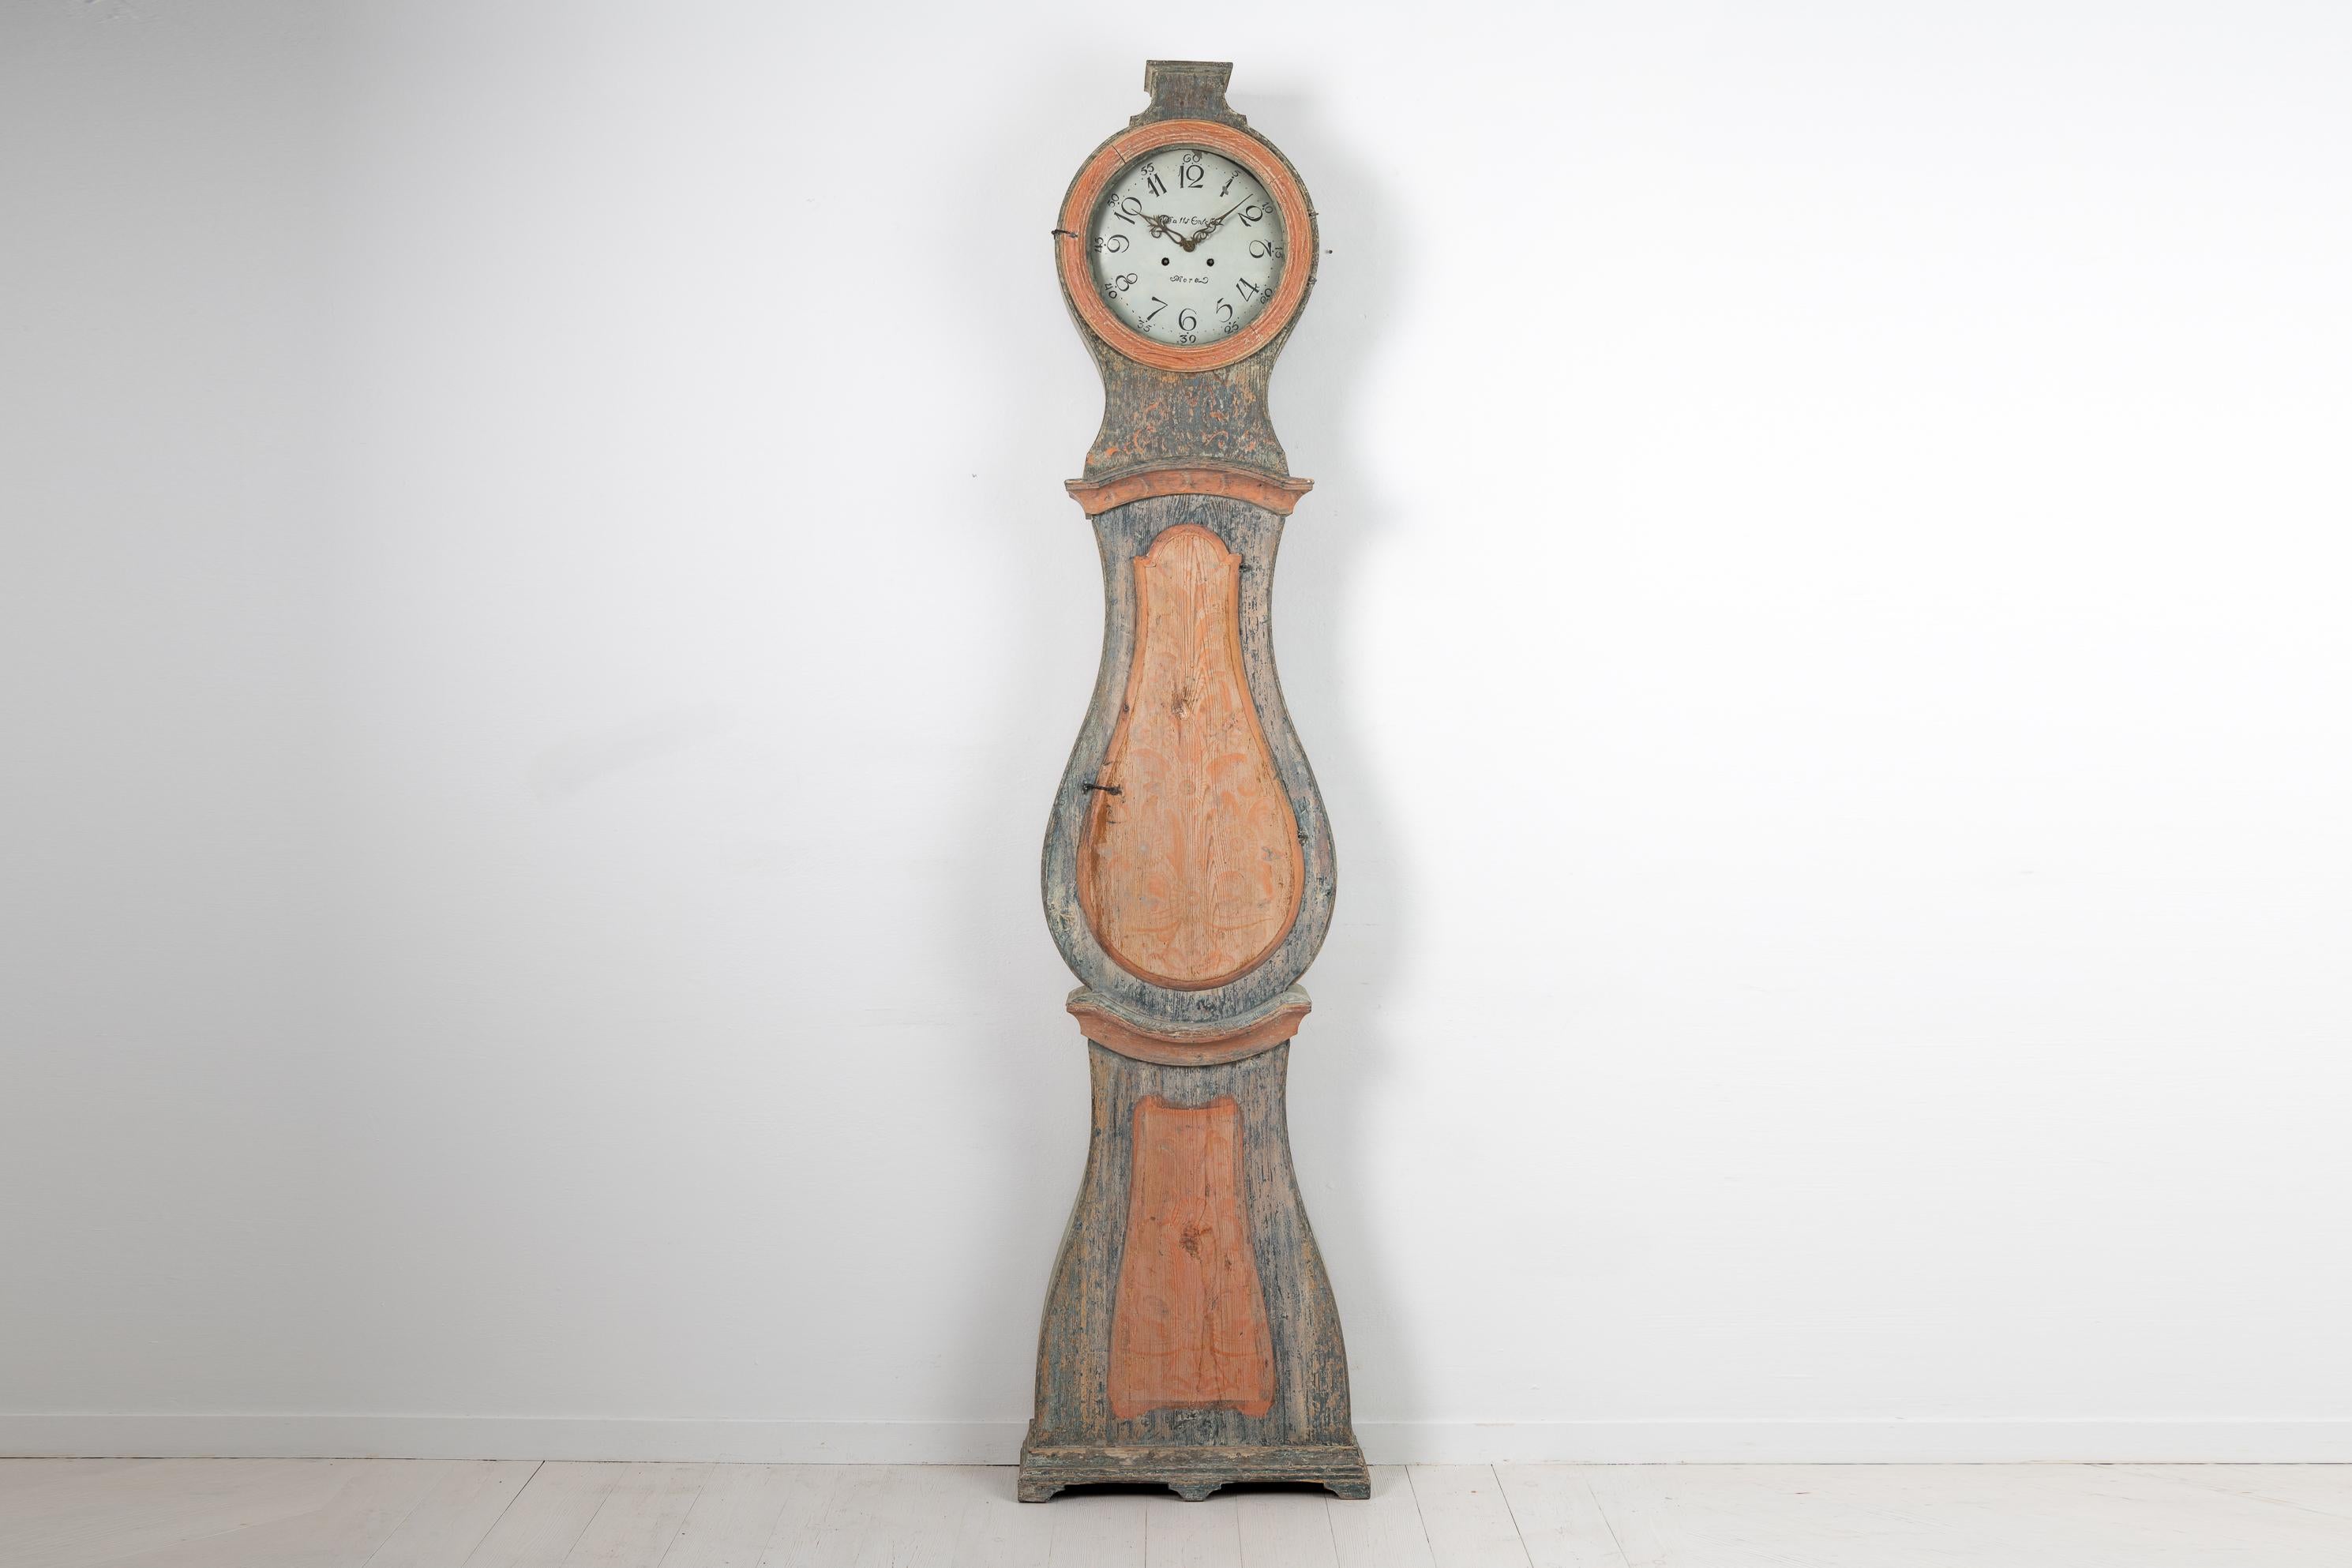 Early 1800s Swedish long case clock with blue original paint. The clock is from Sweden around 1810 to 1820 and made in pine with the classic rococo shape. The clock also has rococo hardware. Dry scraped by hand down to the original first layer of